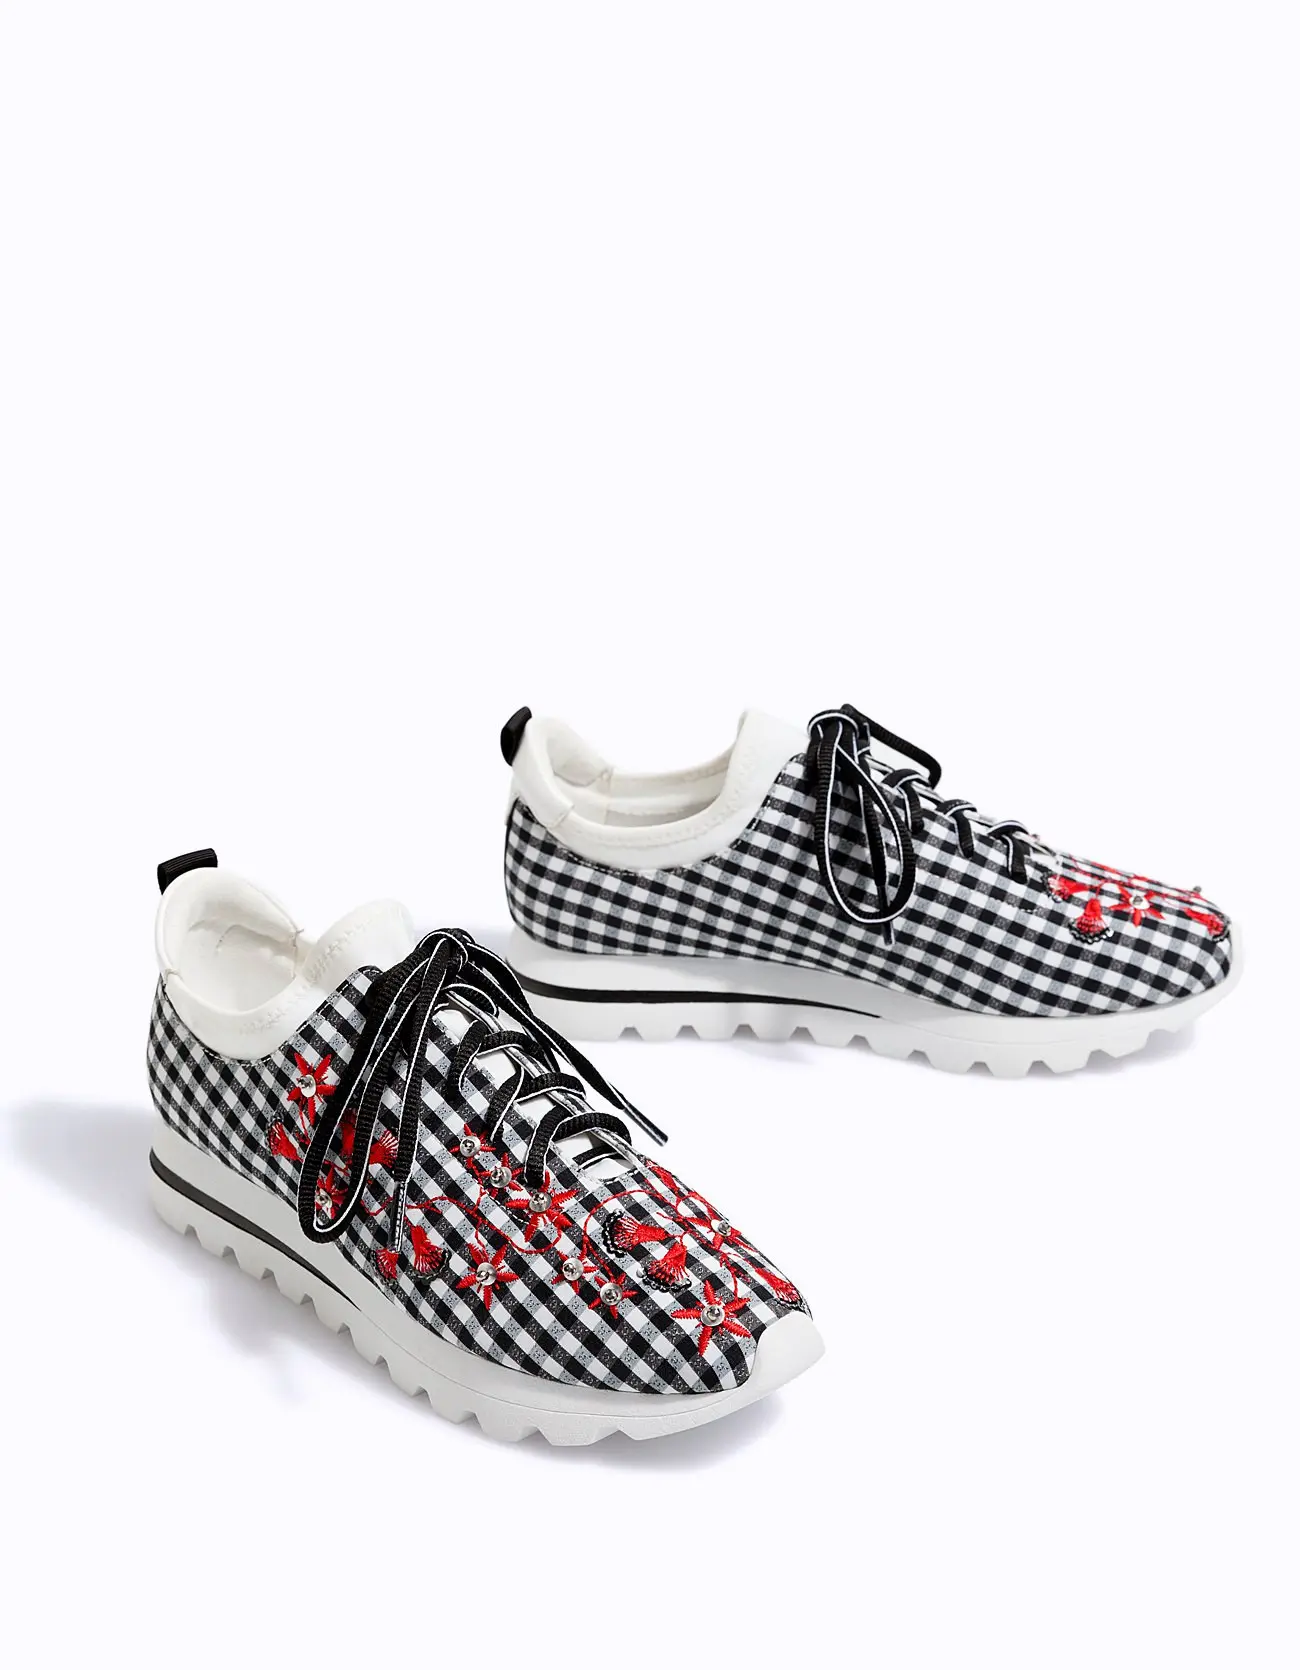 Gingham embroidered sneakers, Rp. 499.900. (Image: stradivarius.com)